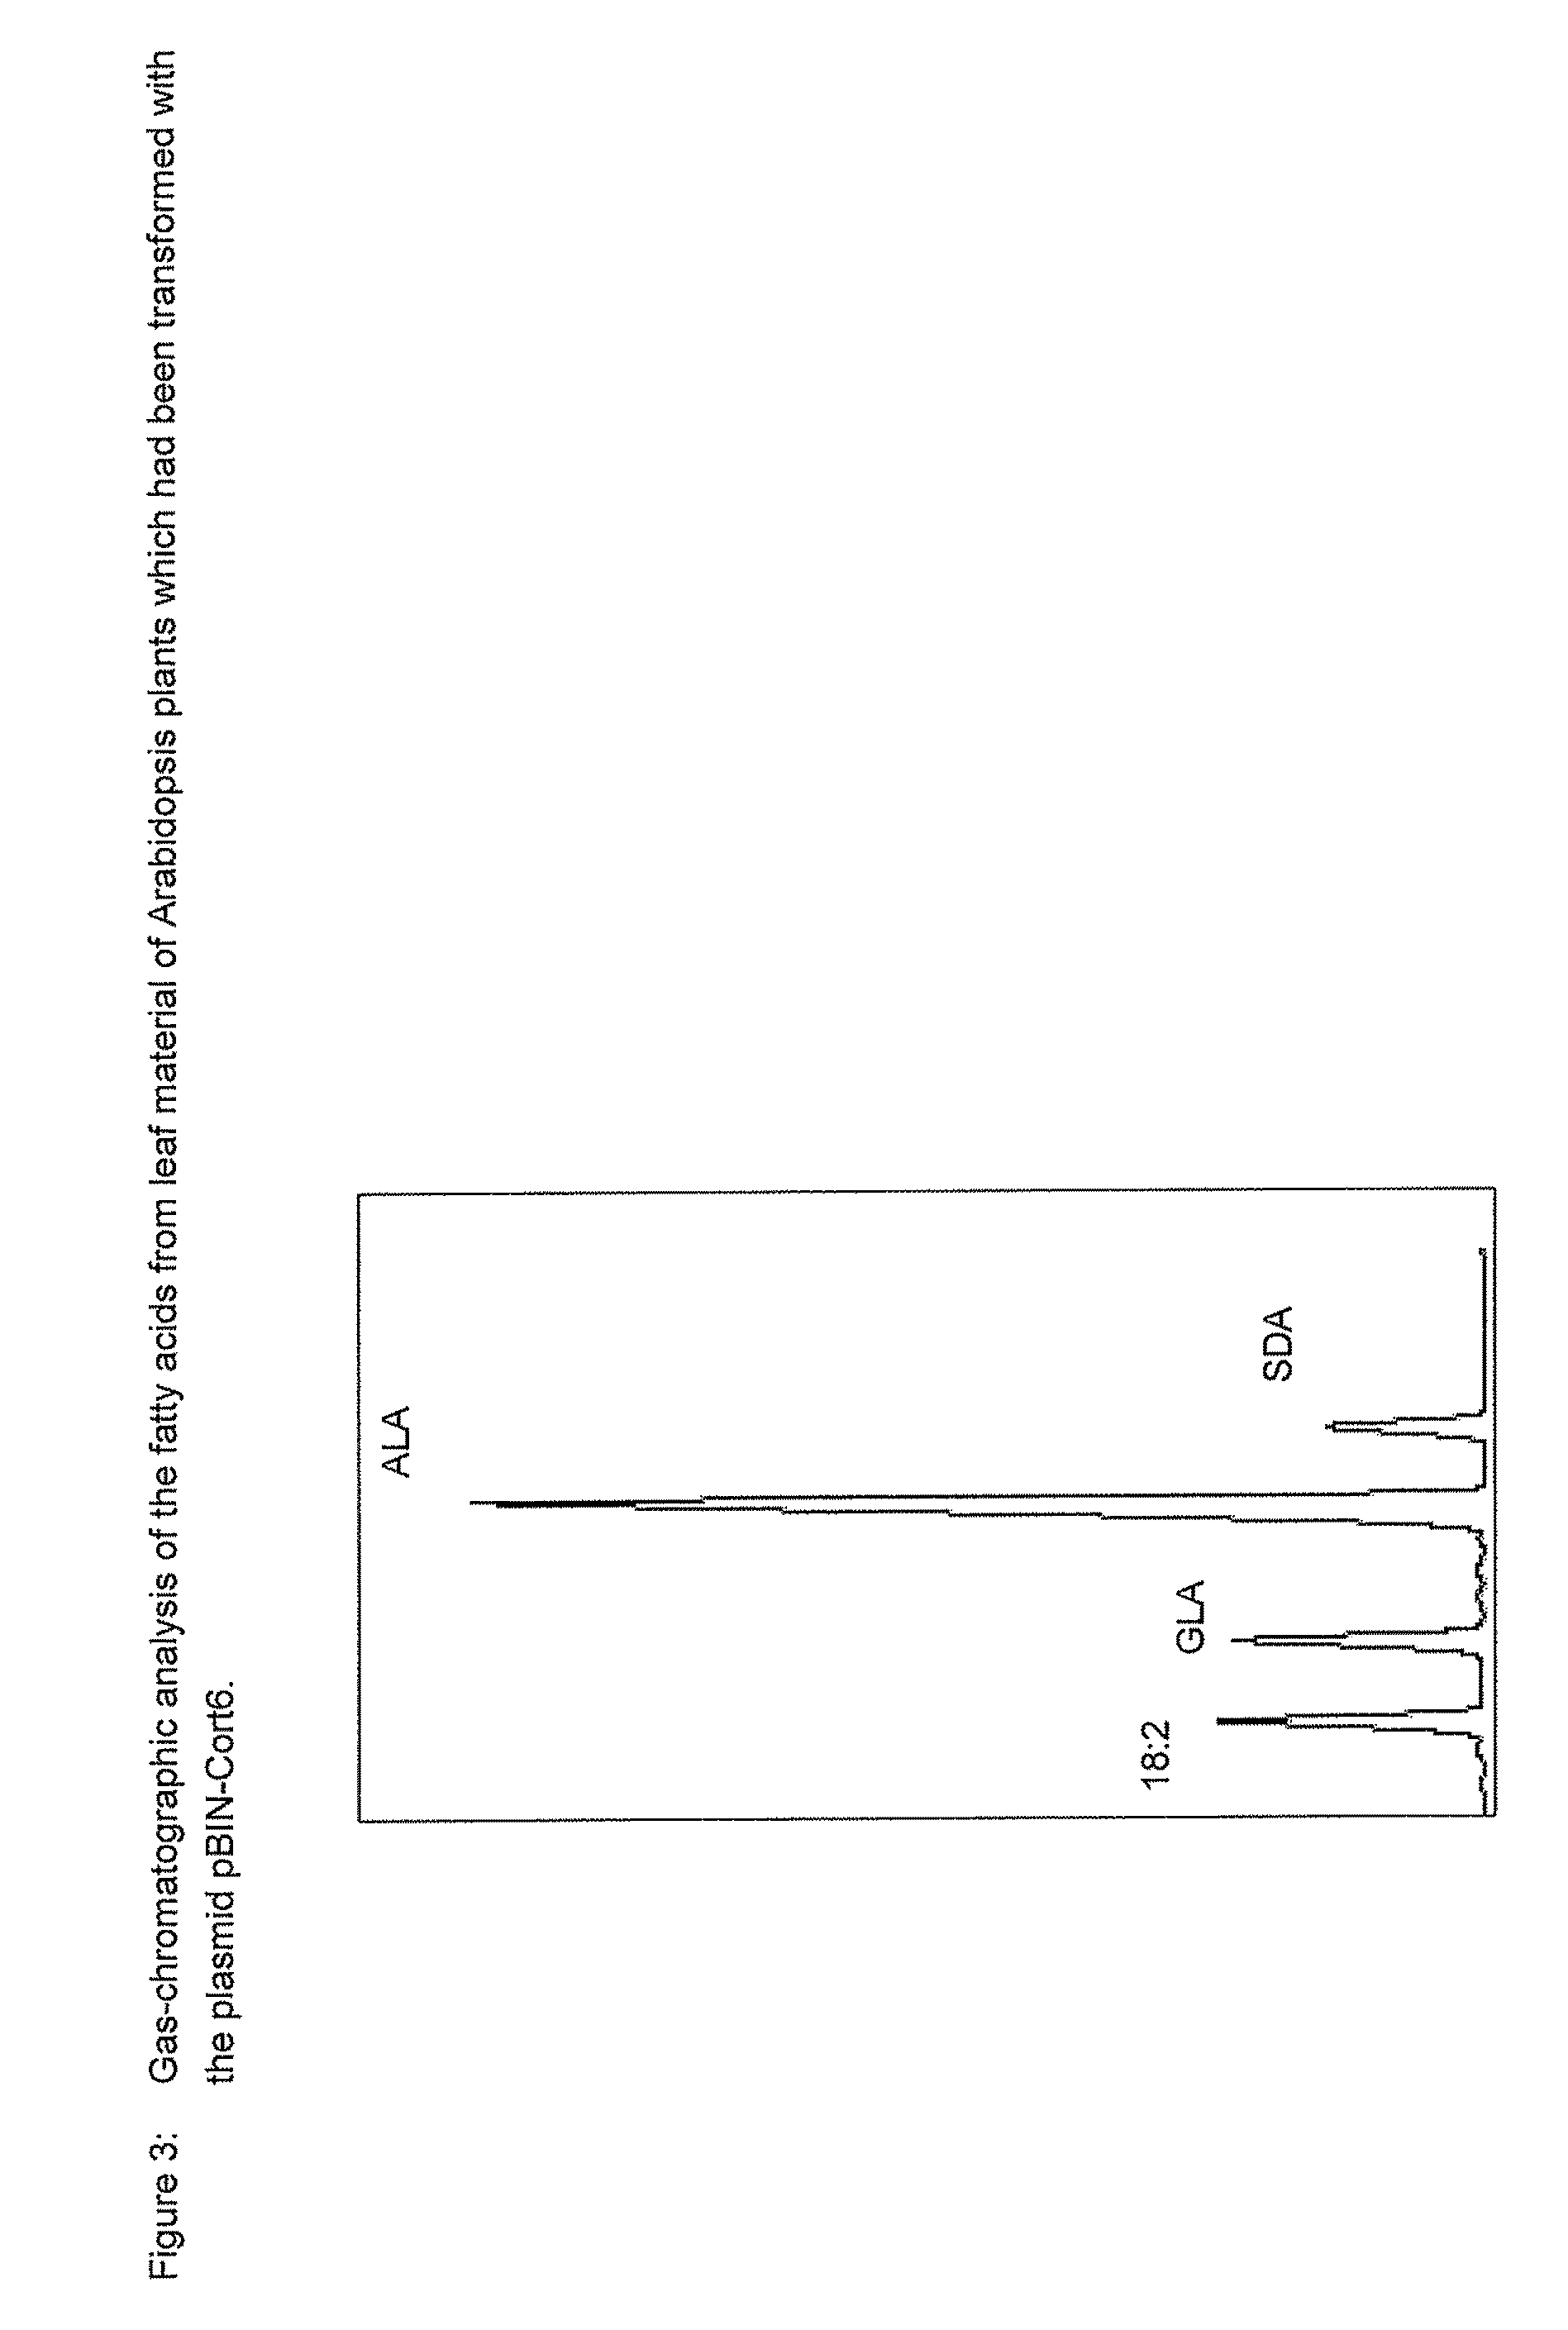 Method for the production of γ-linolenic acid and/or stearidonic acid in transgenic Brassicaceae and Linaceae